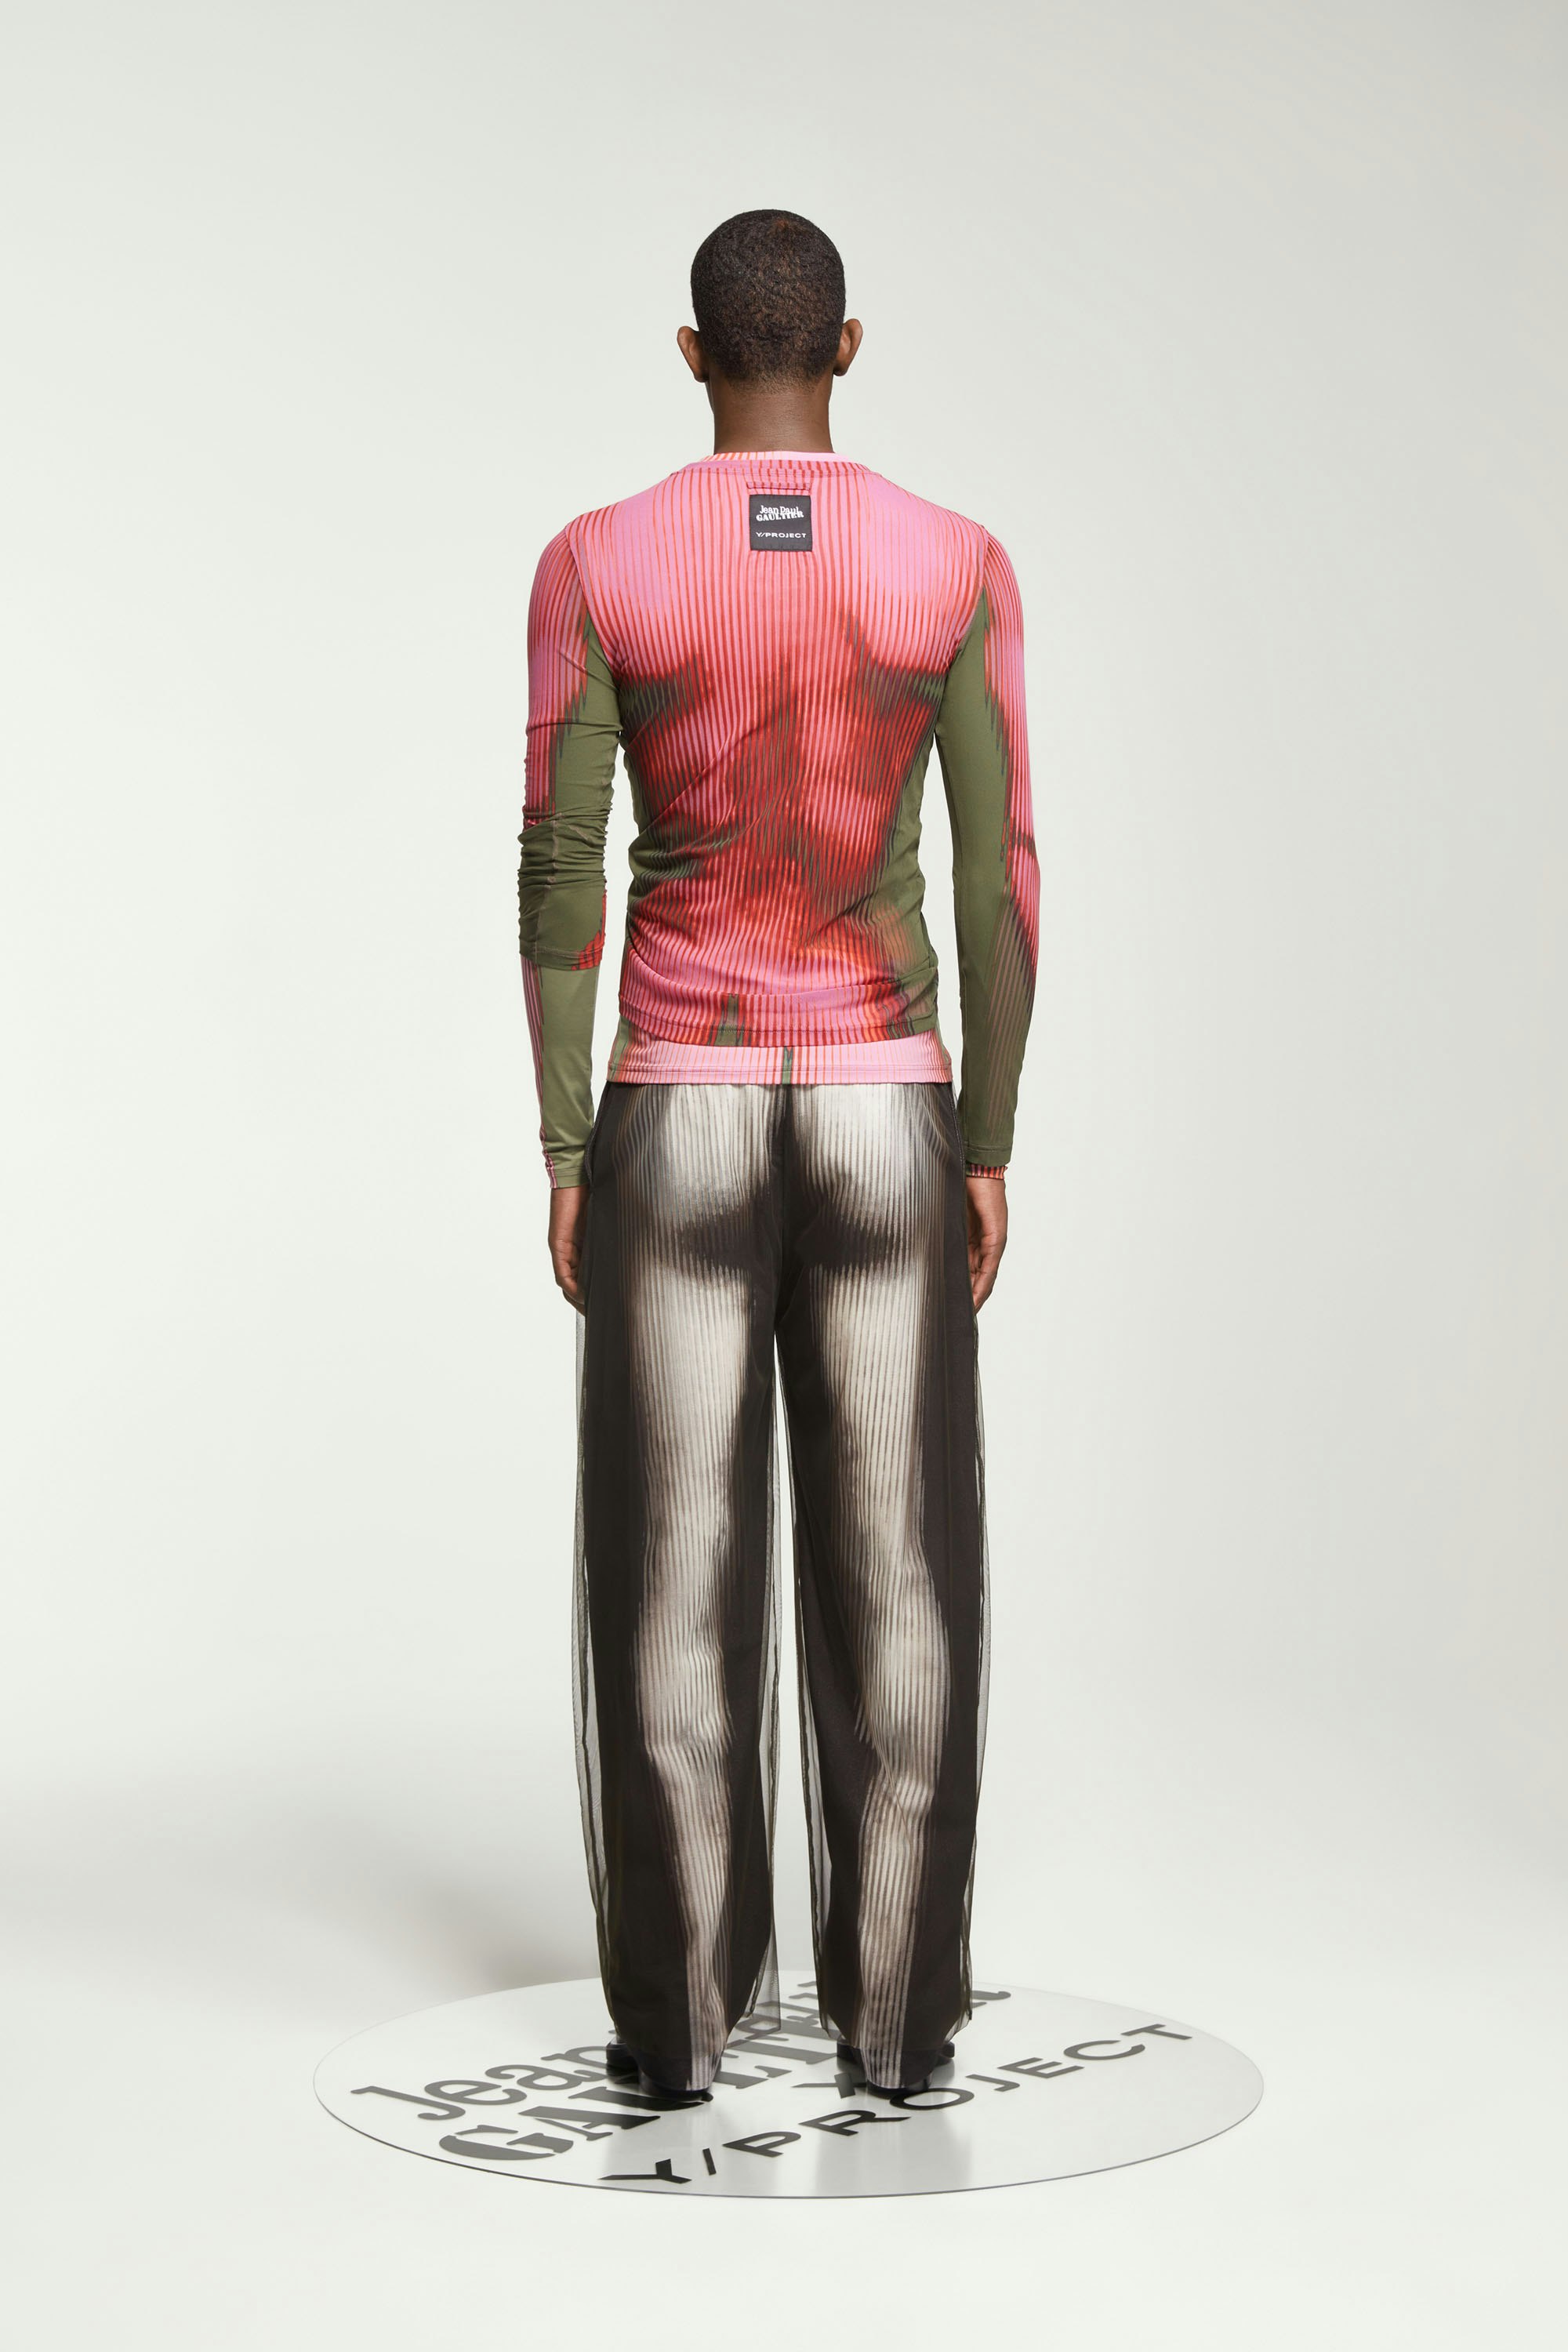 The Pink & Khaki Body Morph Top by Jean Paul Gaultier x Y/Project